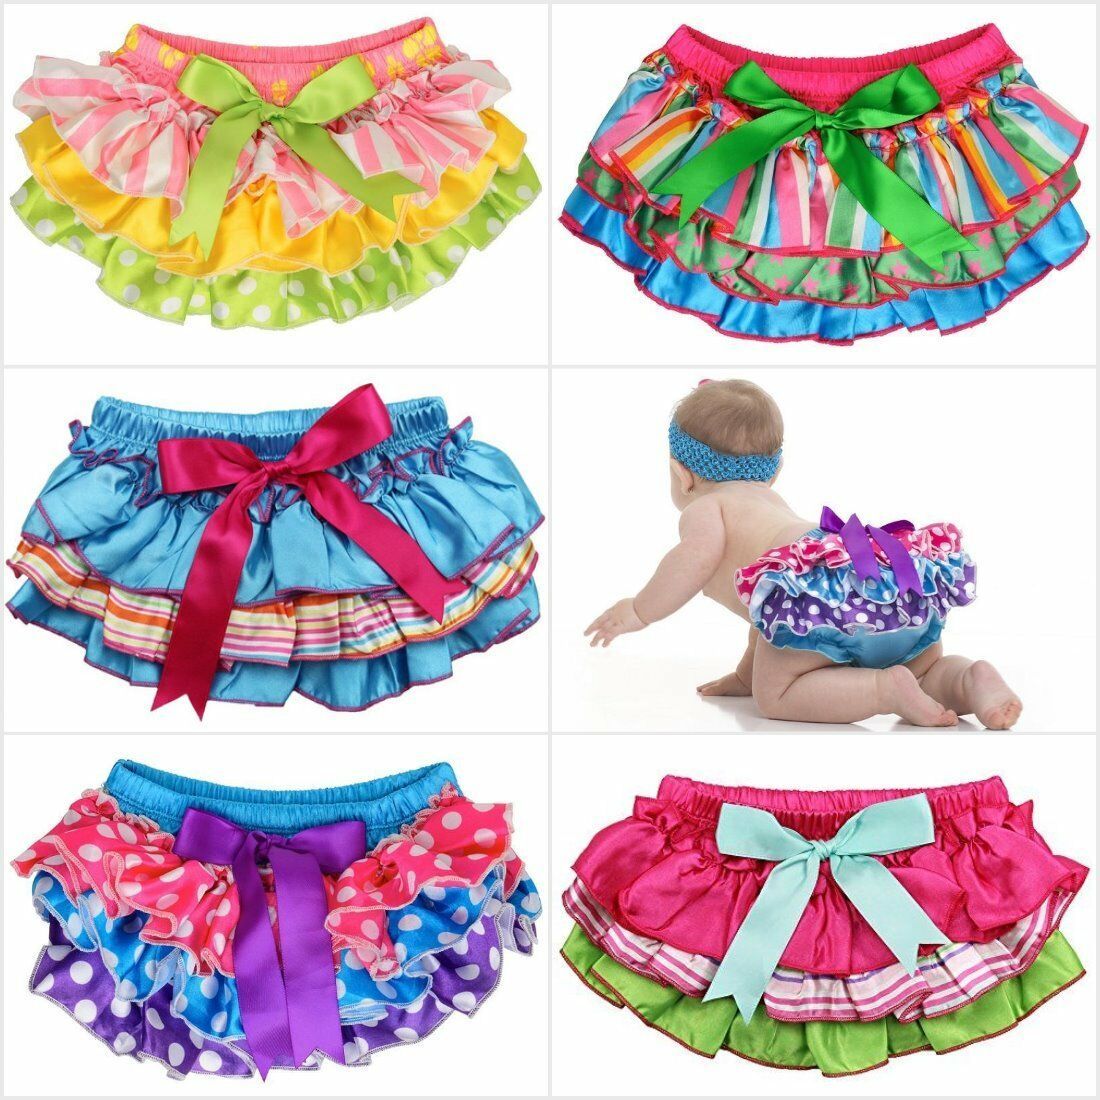 NWT JuDanzy Baby Girls Pastel Colored Ruffle Satin Diaper Cover Bloomers - $4.79